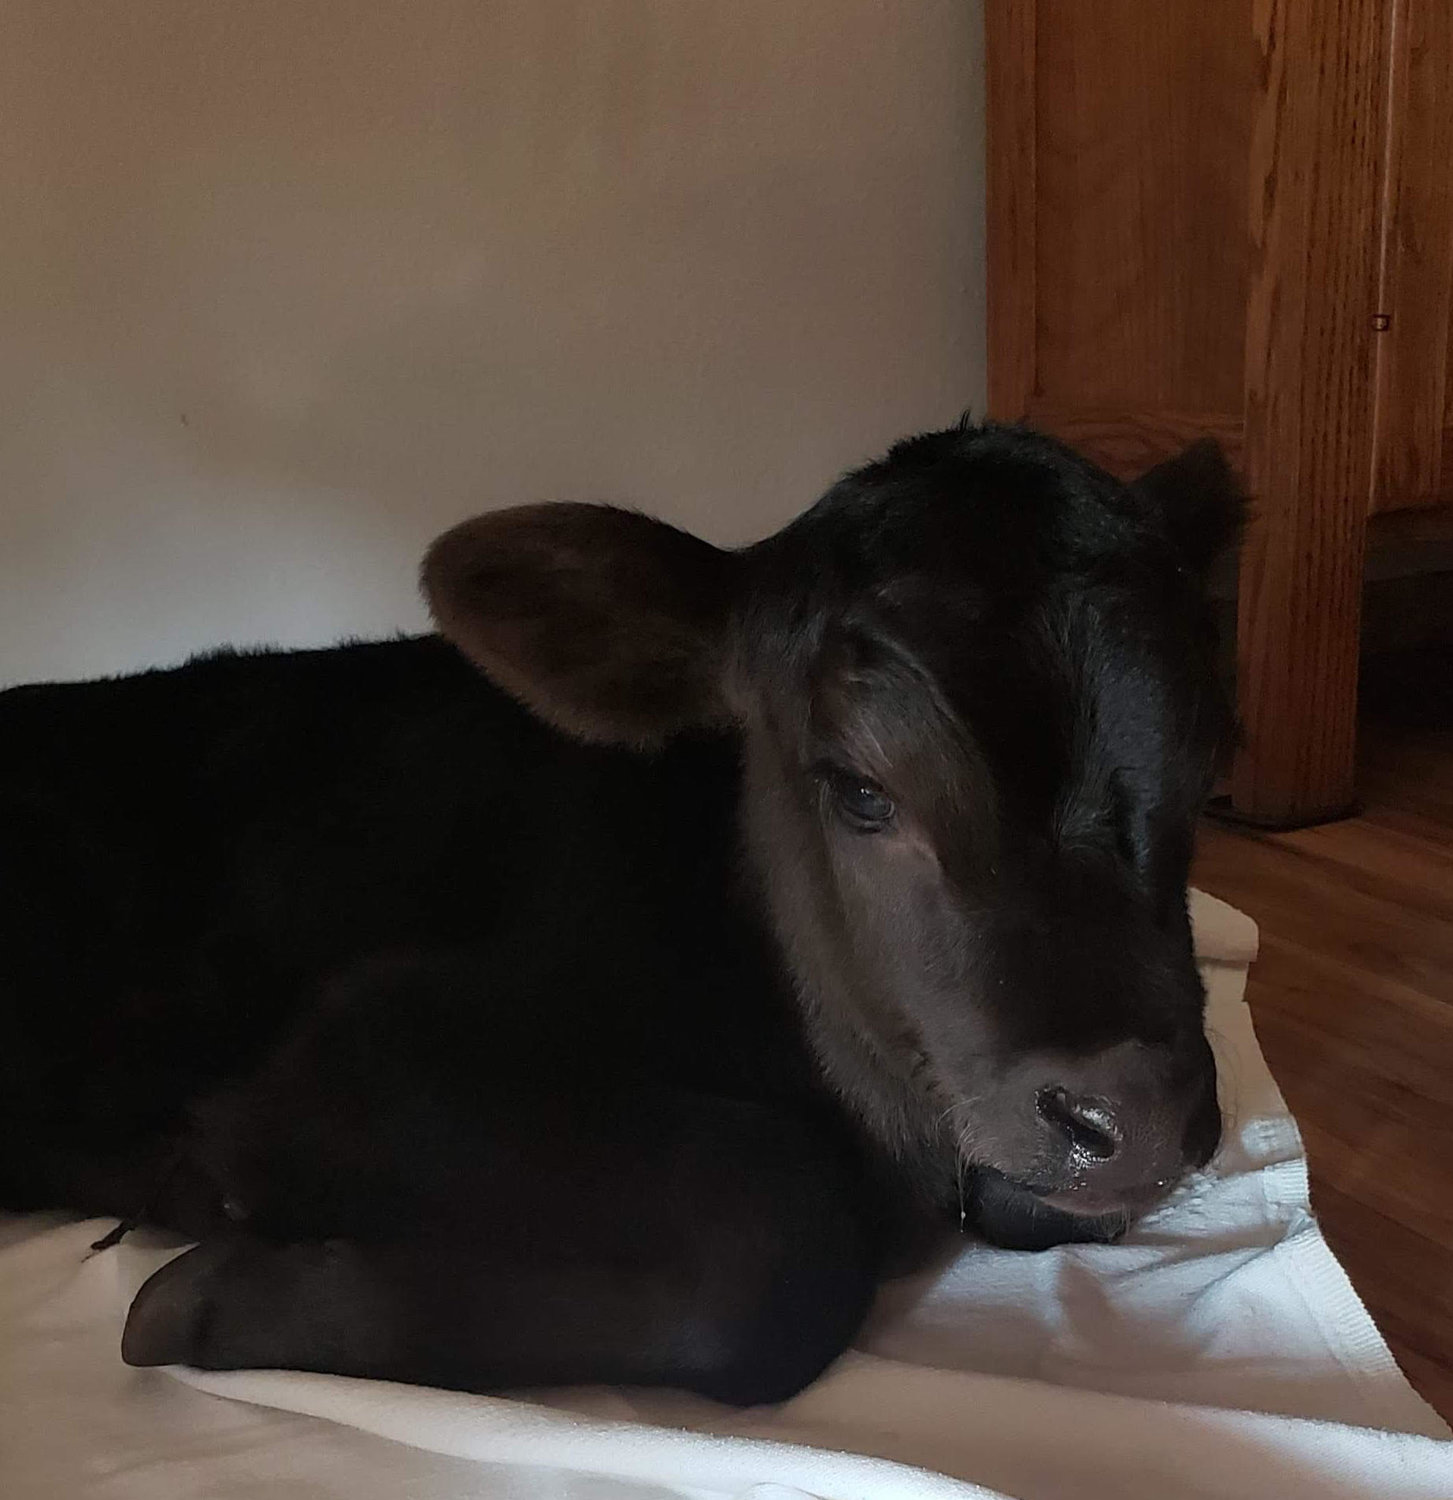 This baby calf was found in the field in distress in 100+ degree temps. The calf was a twin and the cow abandoned him. The calf was very ill and had to be at the vet for two days. “He is better now, but we are having to bottle feed him. The vet bill was $146.00 for two days…but it saved his life," shared Dawn Ricks, Shawn's wife.